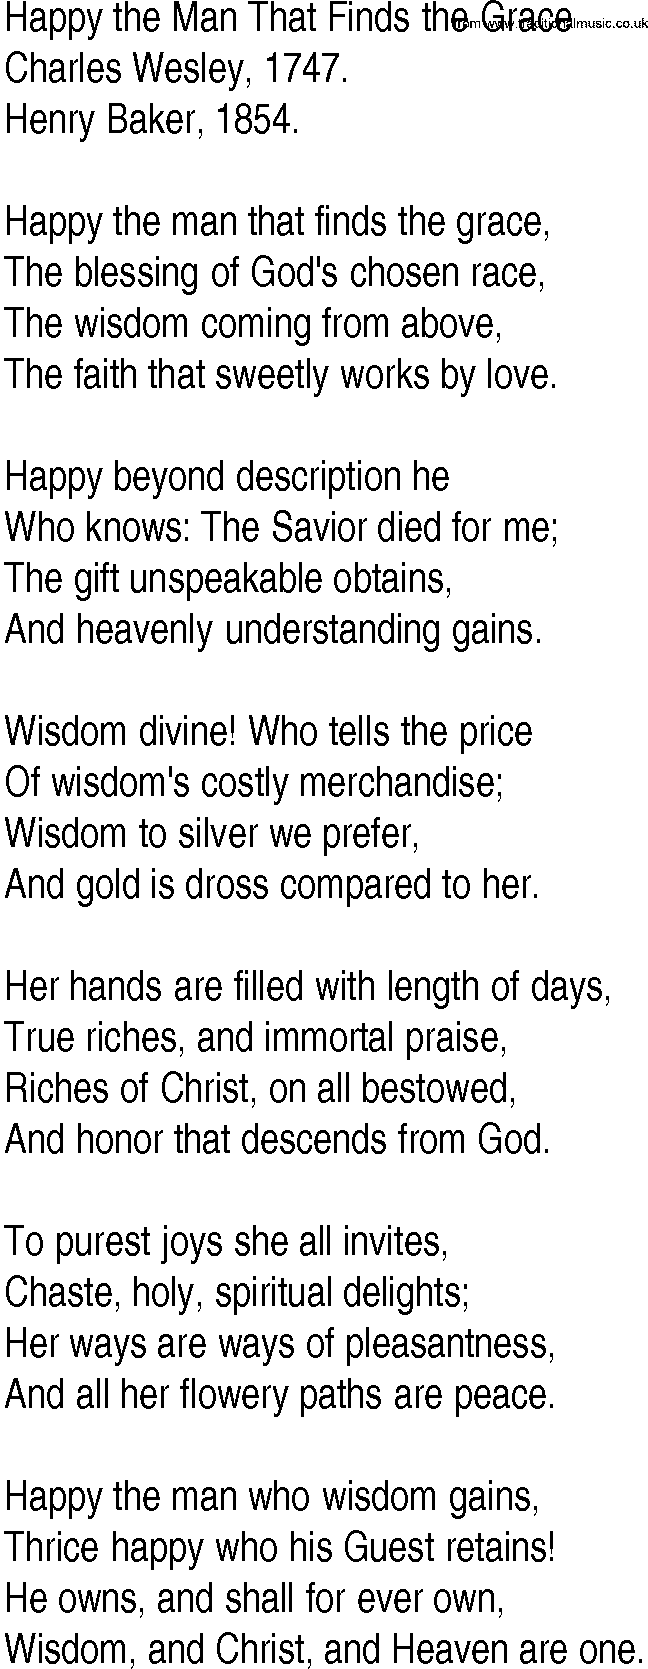 Hymn and Gospel Song: Happy the Man That Finds the Grace by Charles Wesley lyrics